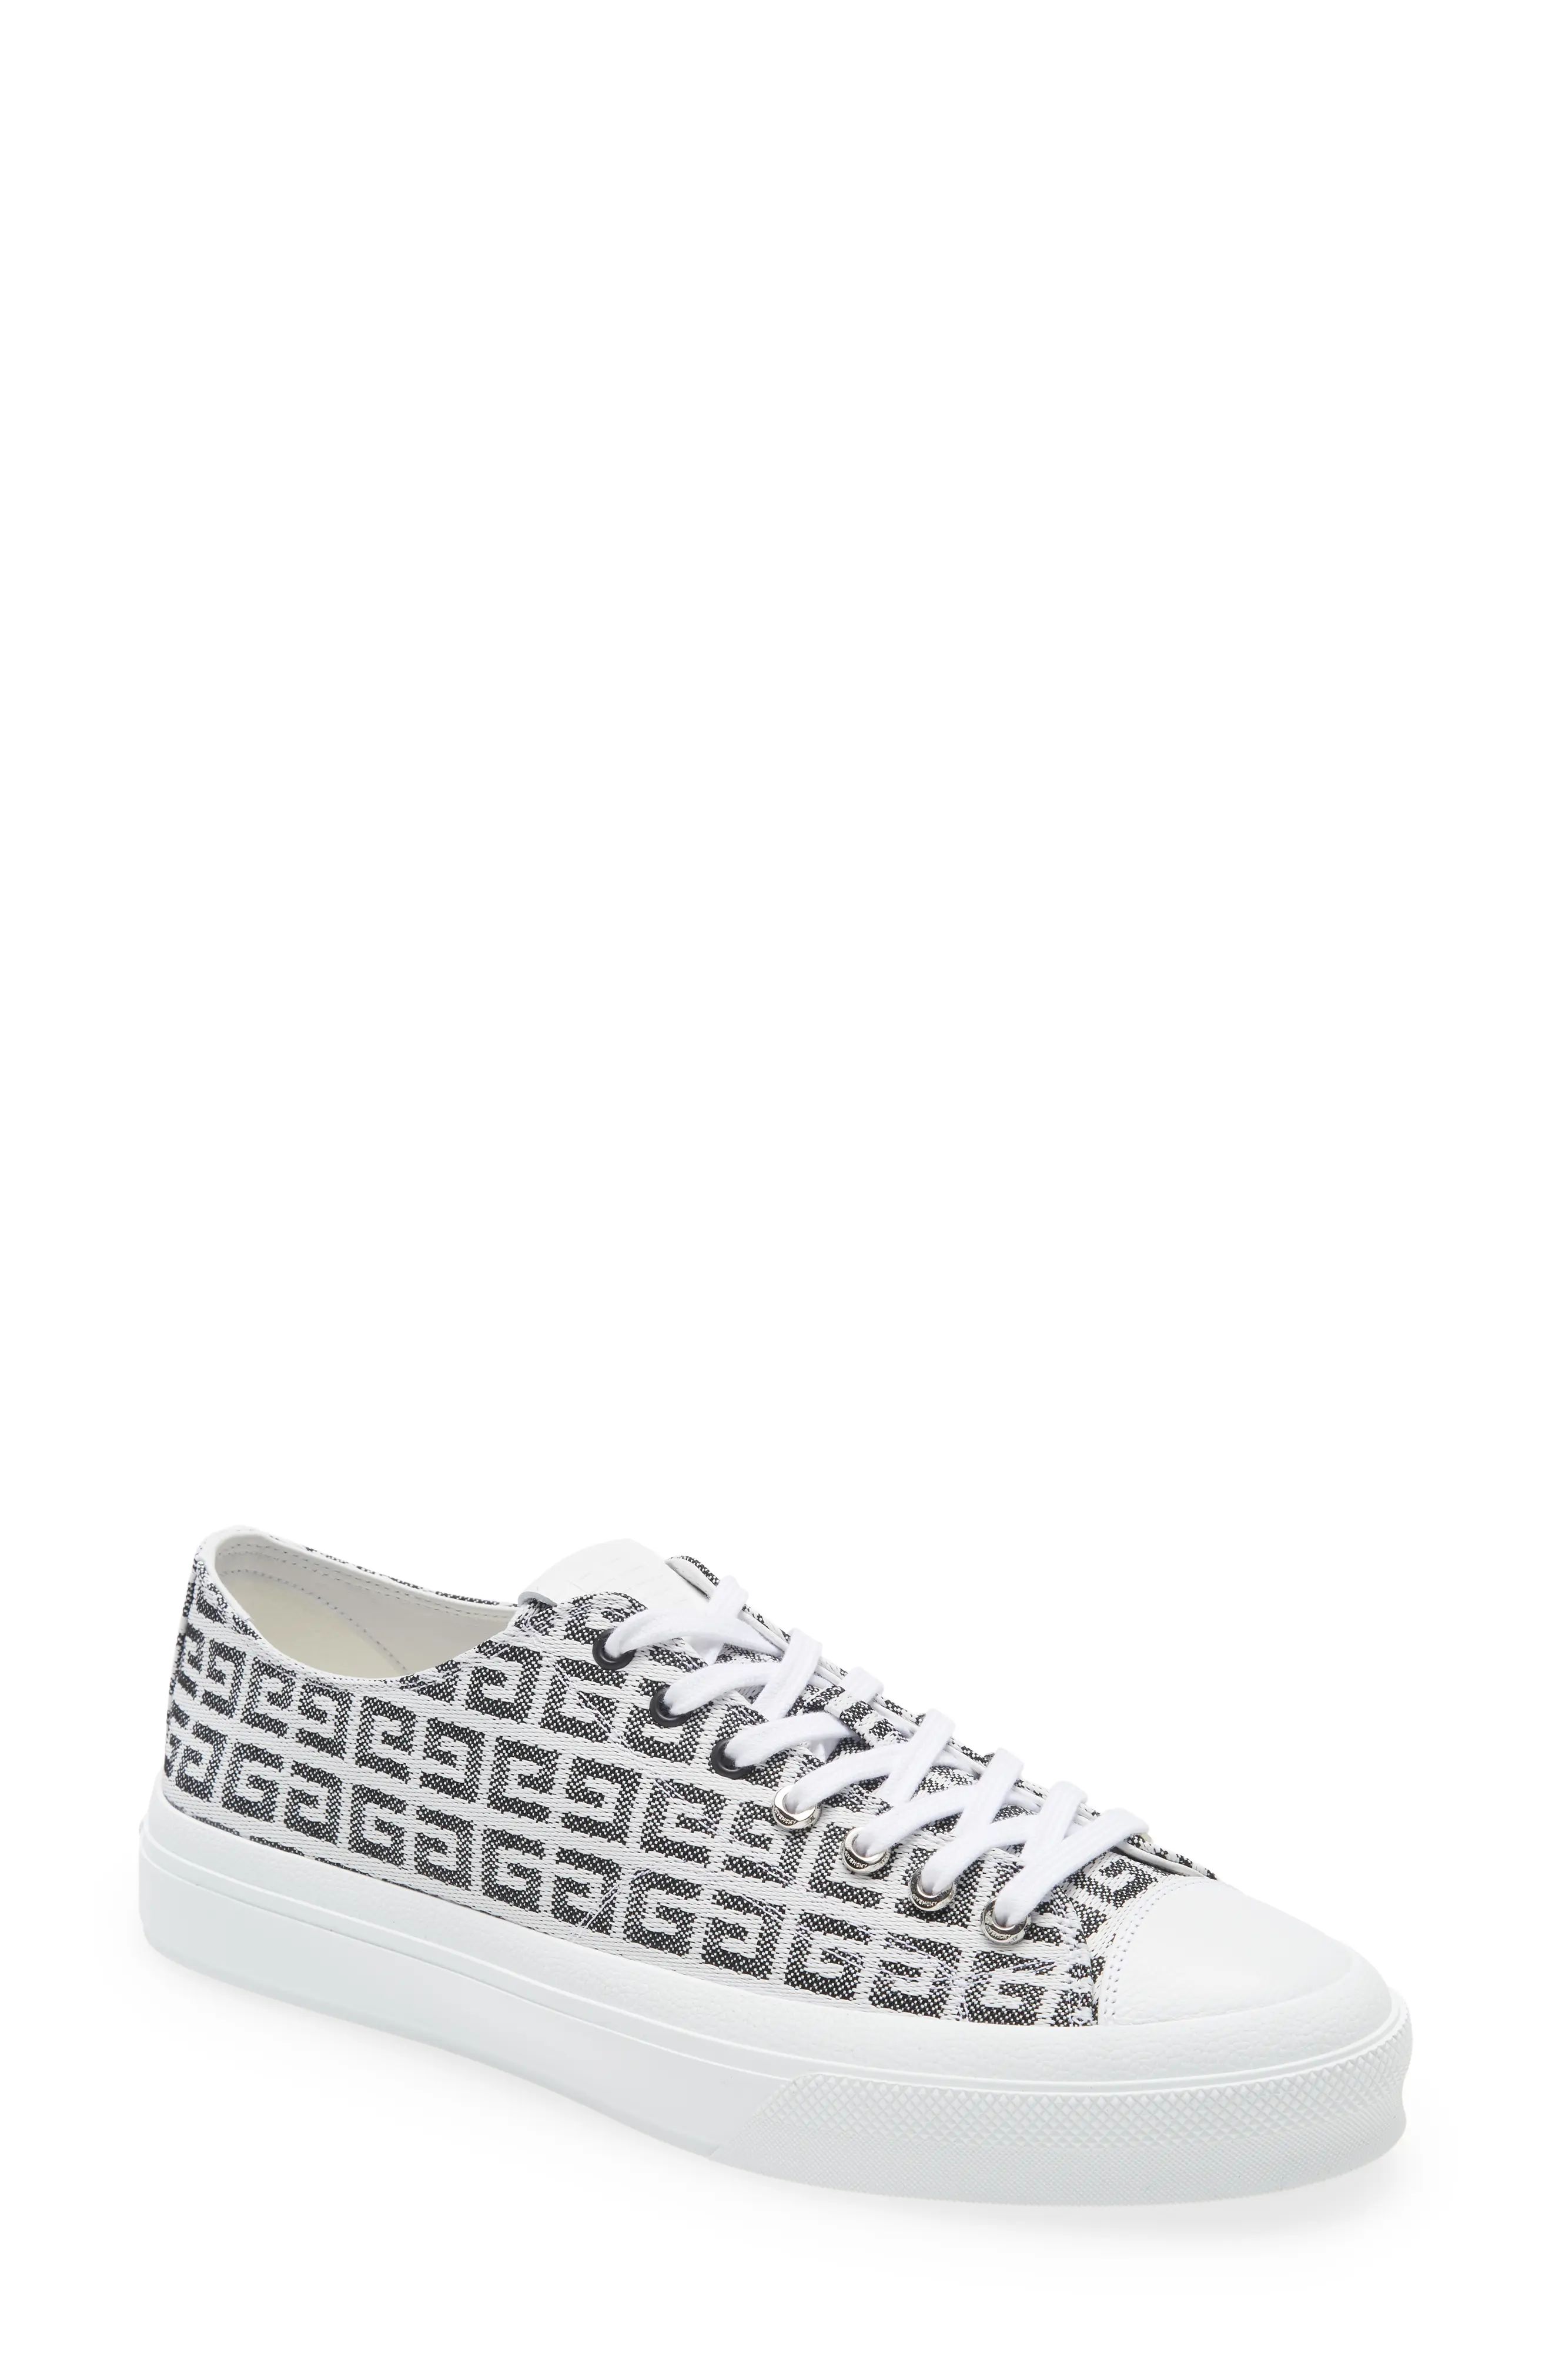 Givenchy City Low Top Sneaker in Black/white at Nordstrom, Size 10Us | Nordstrom